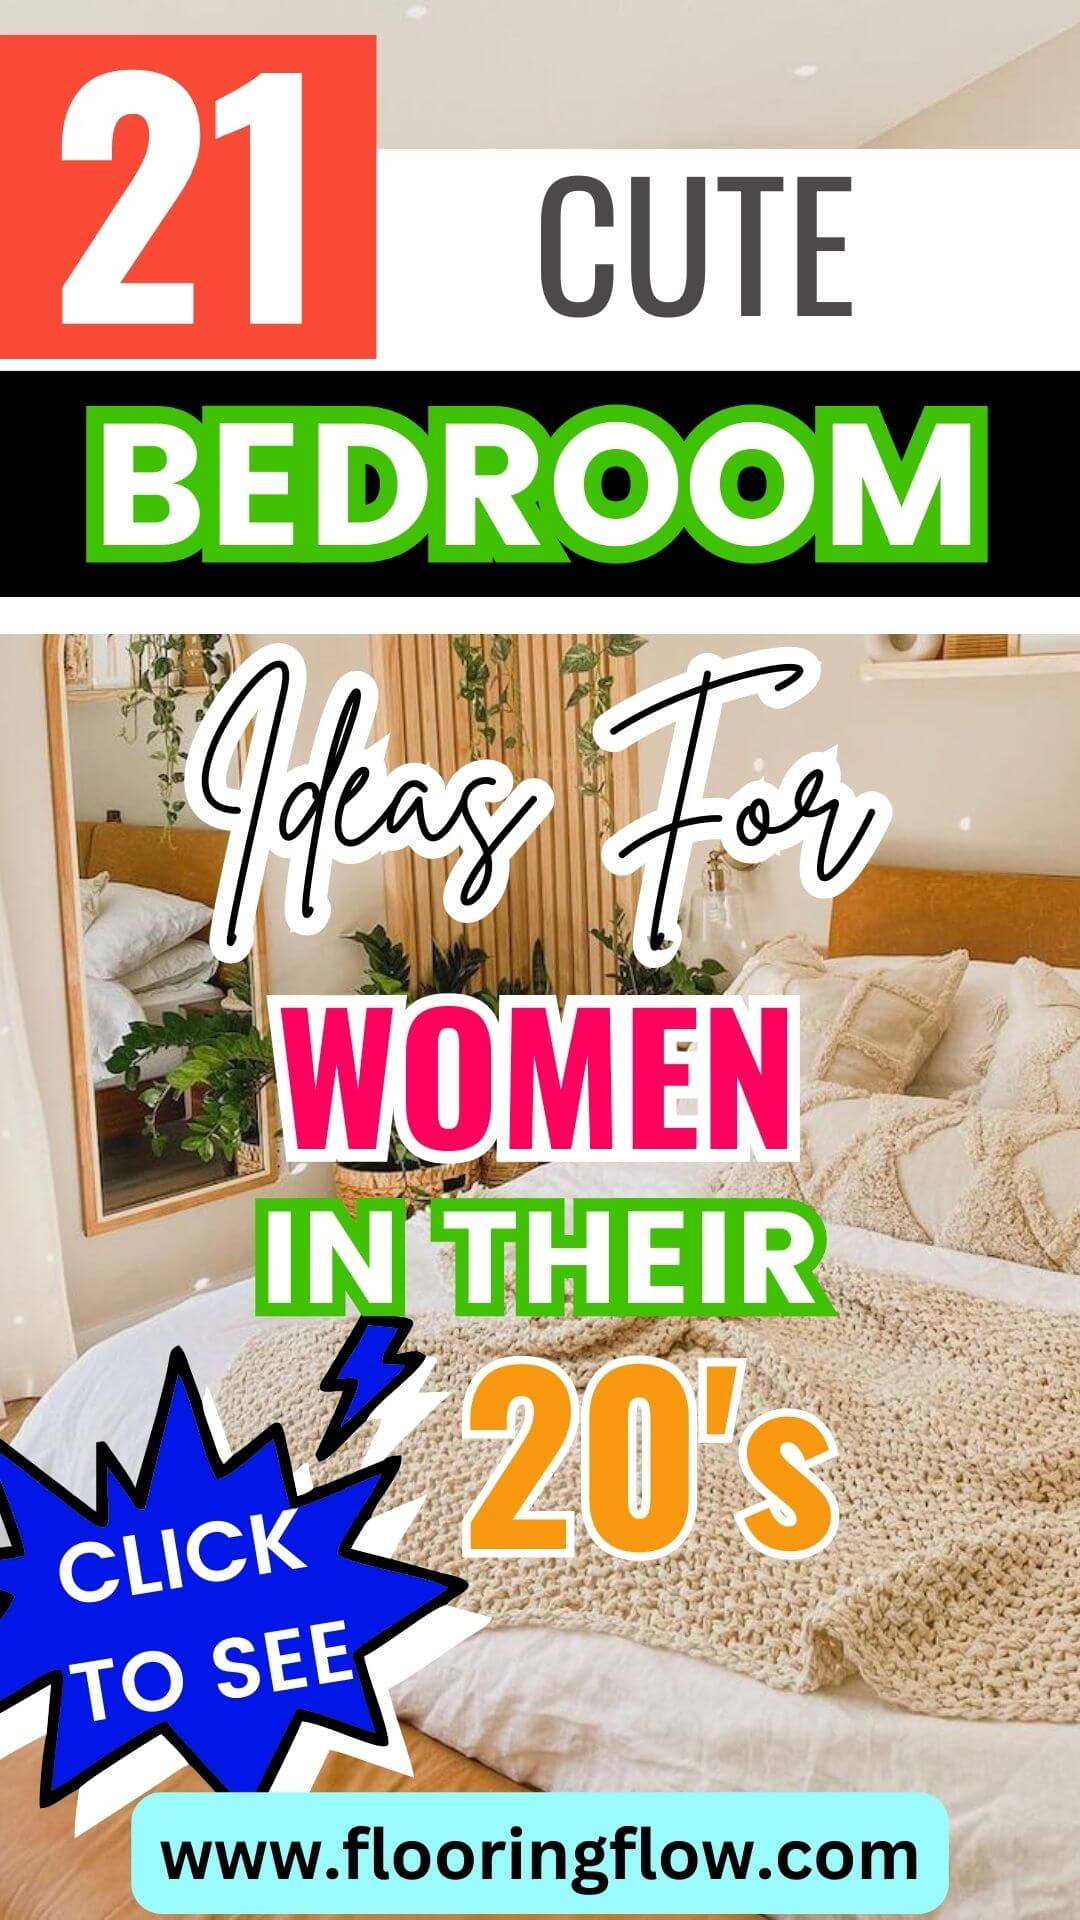 Bedroom Ideas for Women in Their 20s